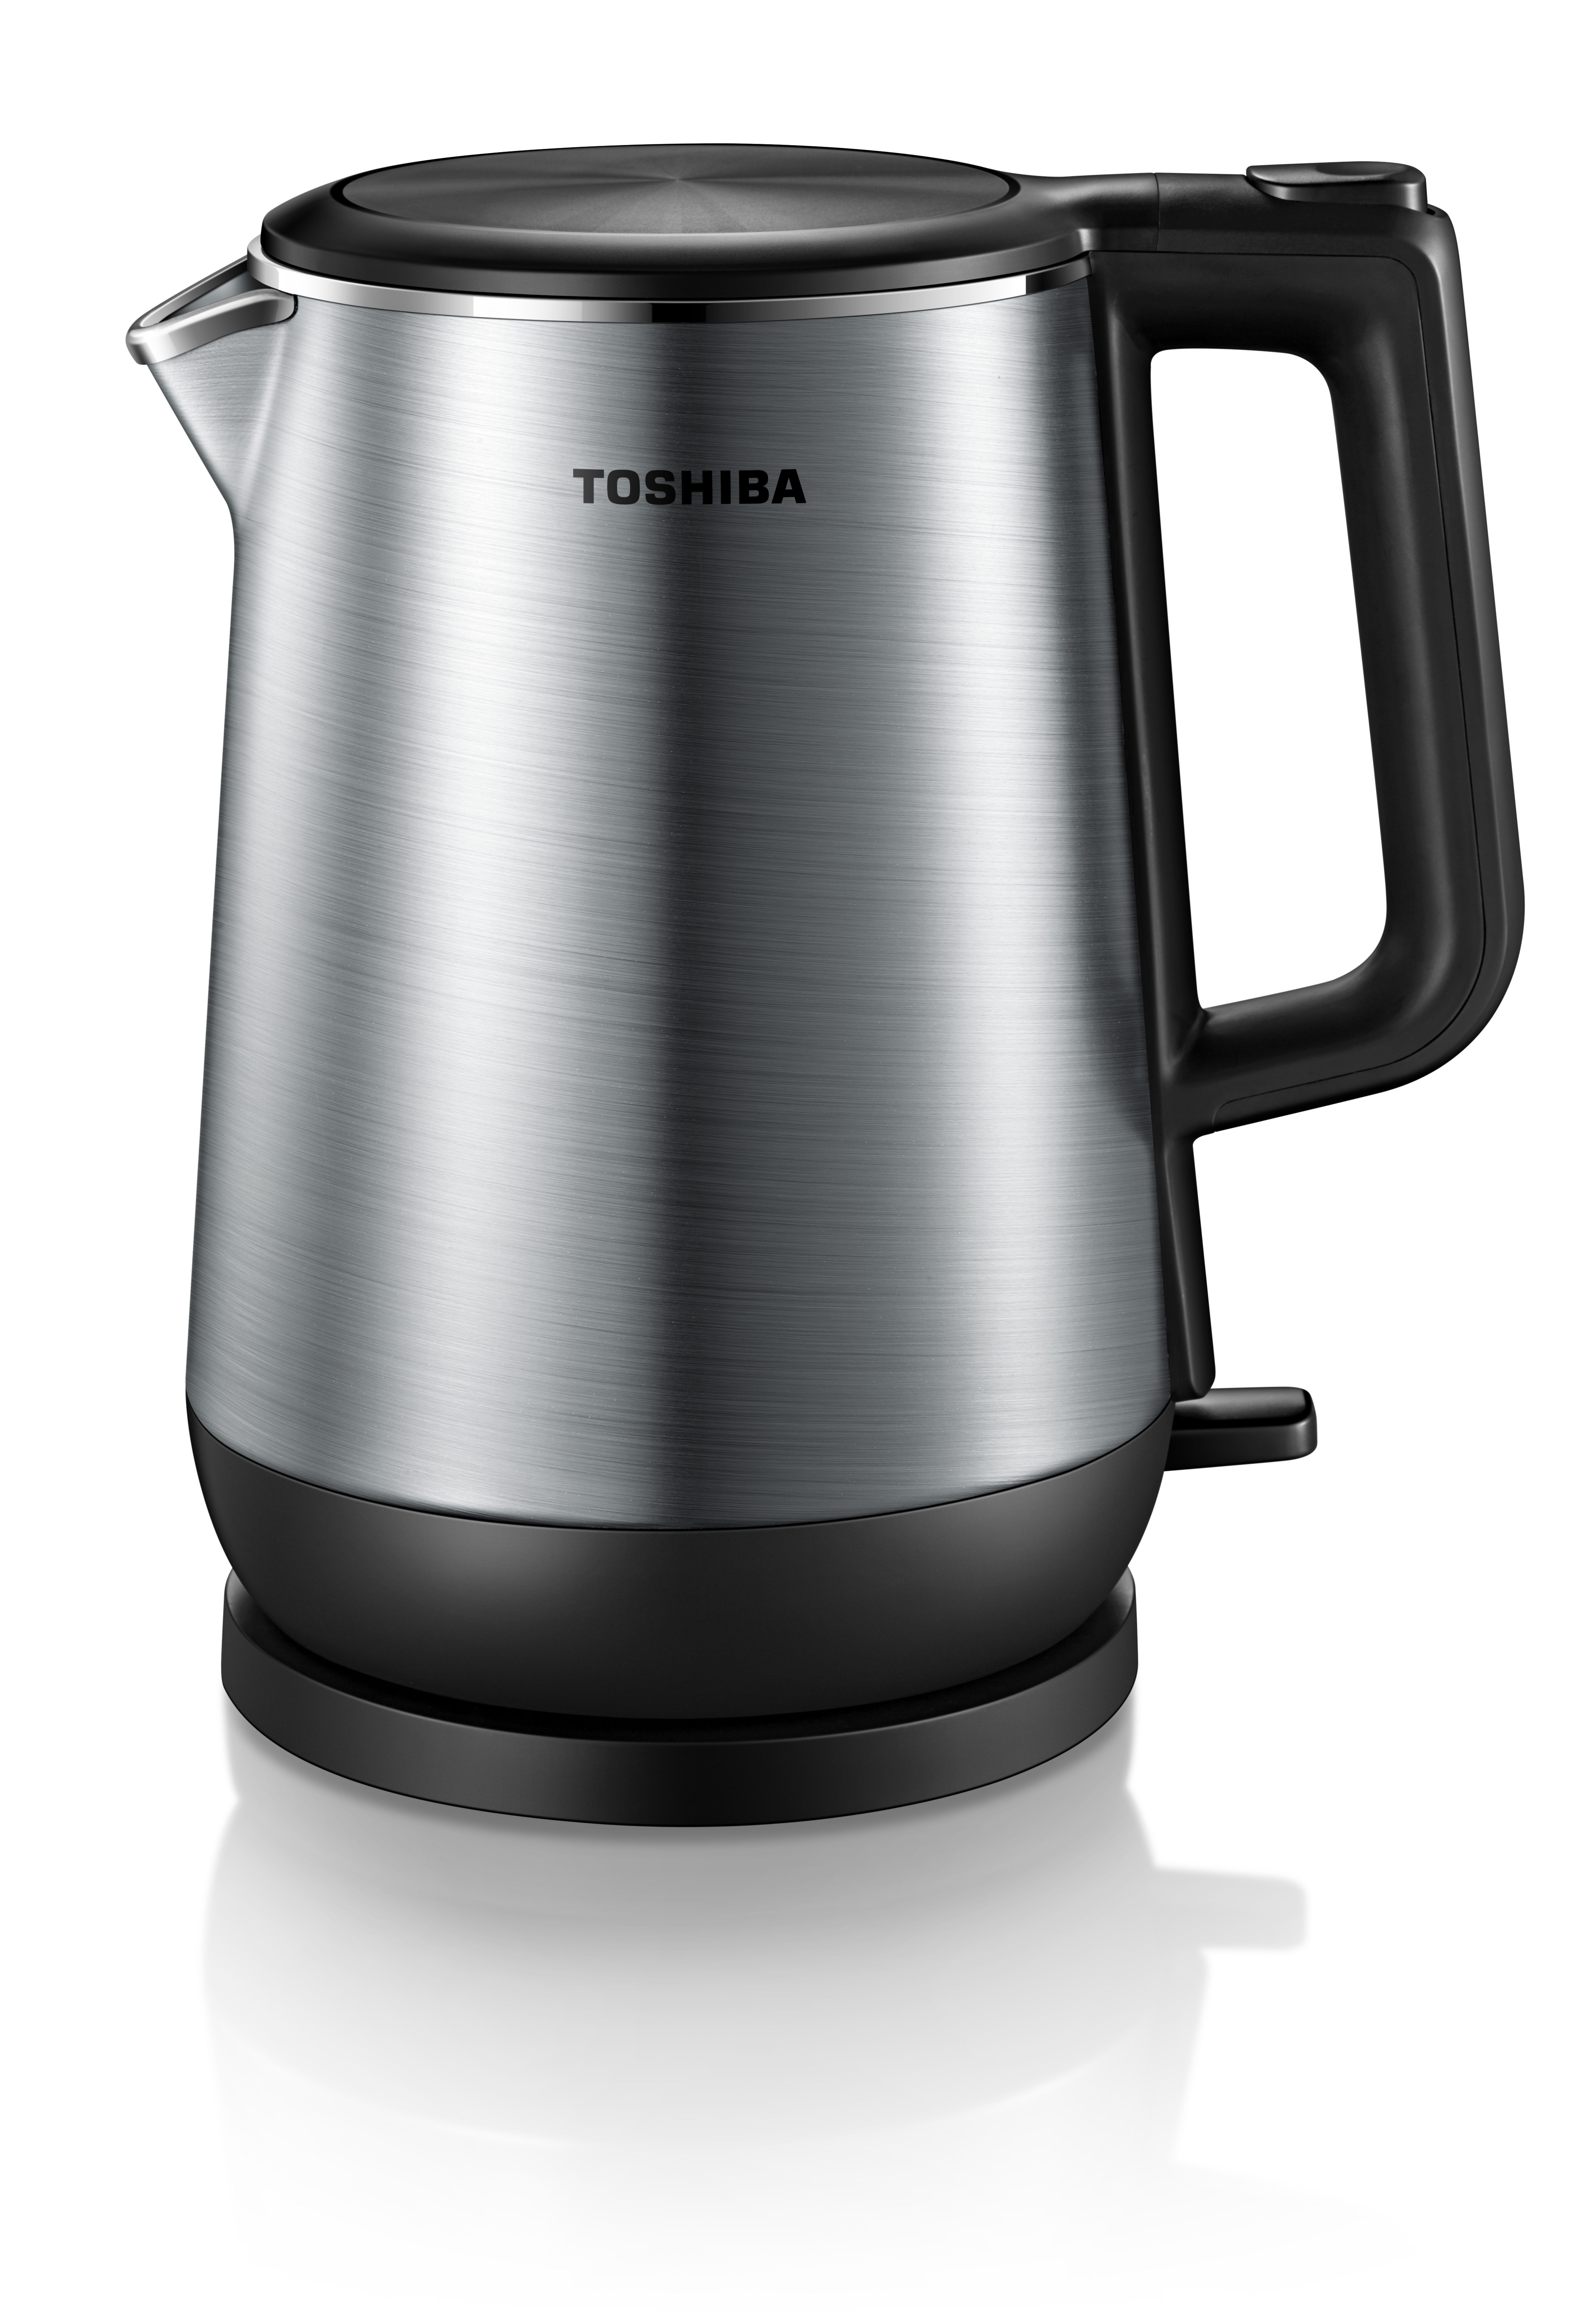 Toshiba 1.7L Electric Kettle KT-17DRRS